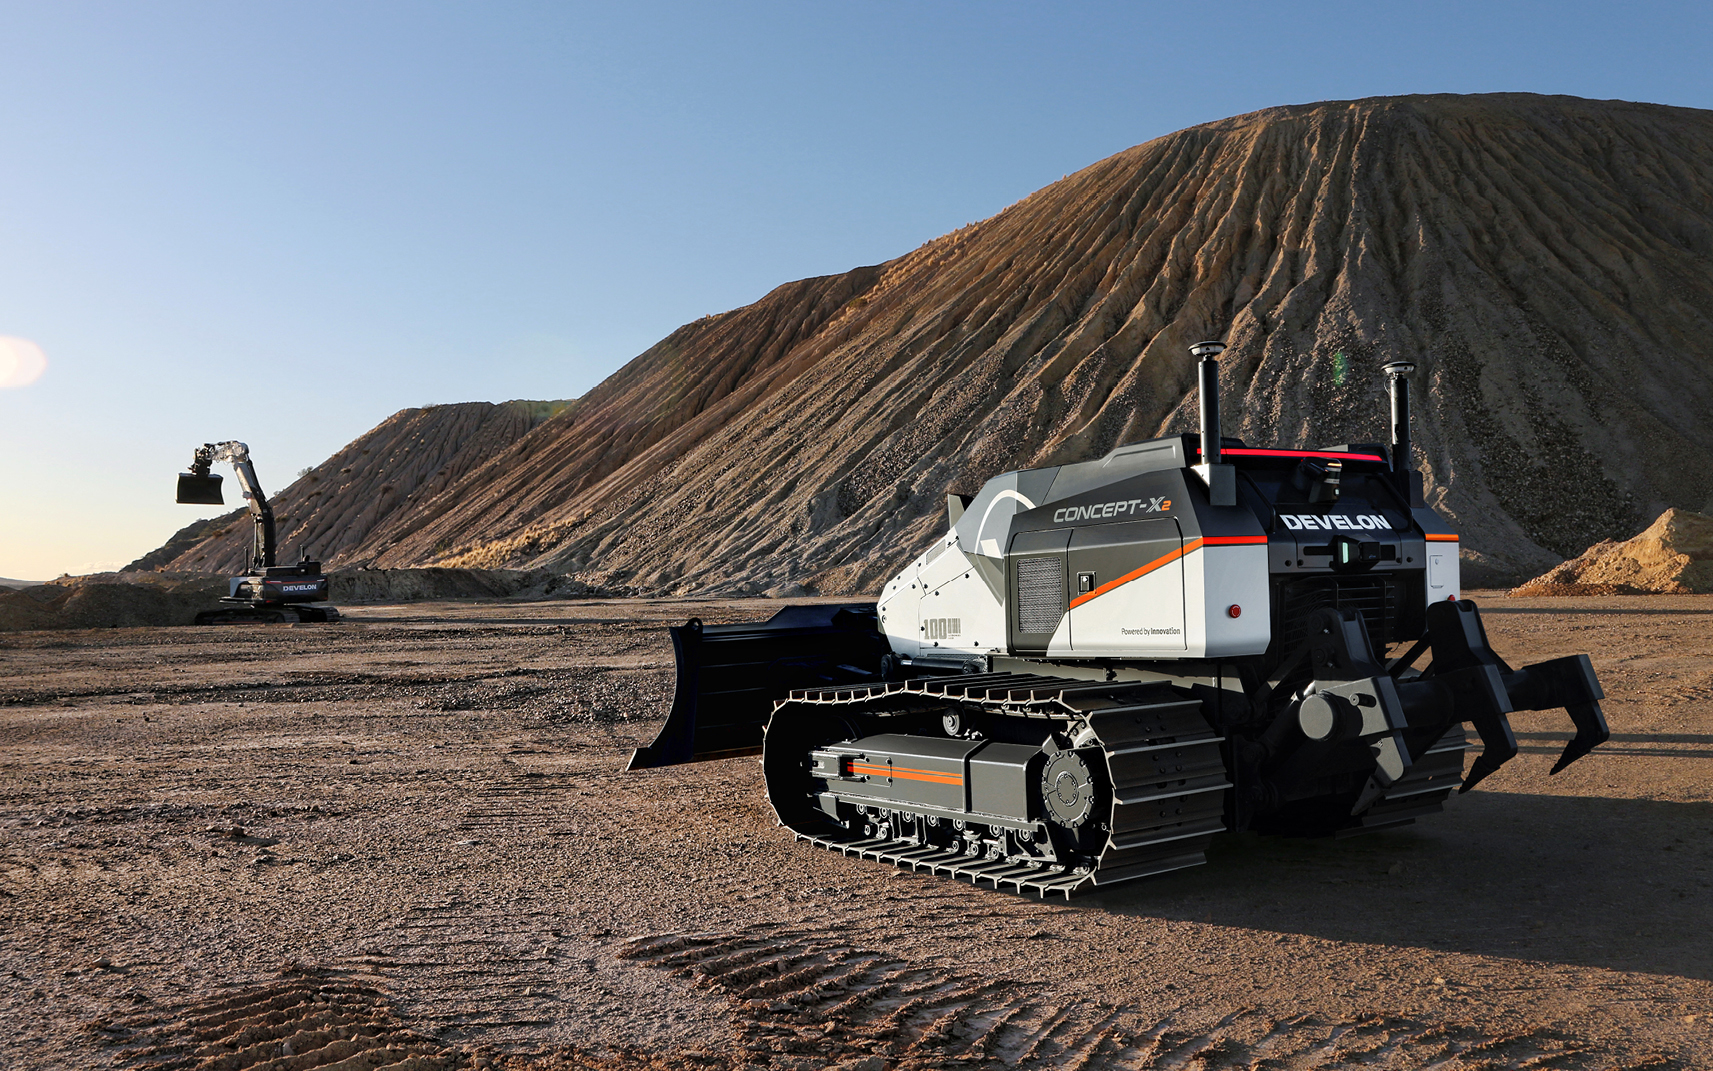 An autonomous dozer is pictured at the DEVELON proving grounds in Arizona.